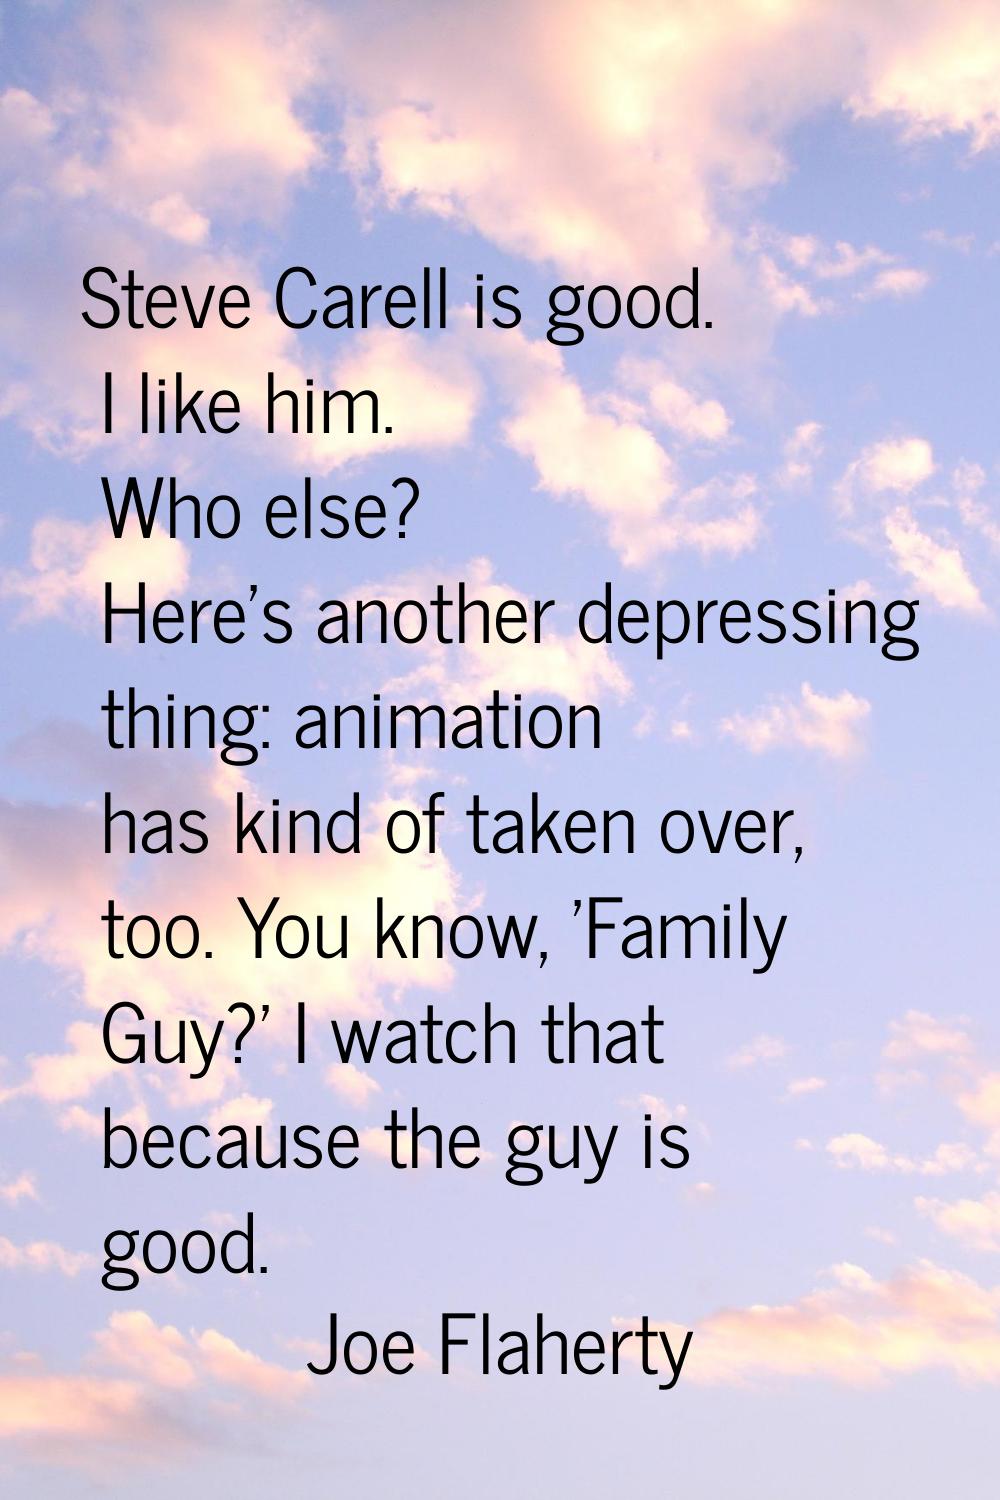 Steve Carell is good. I like him. Who else? Here's another depressing thing: animation has kind of 